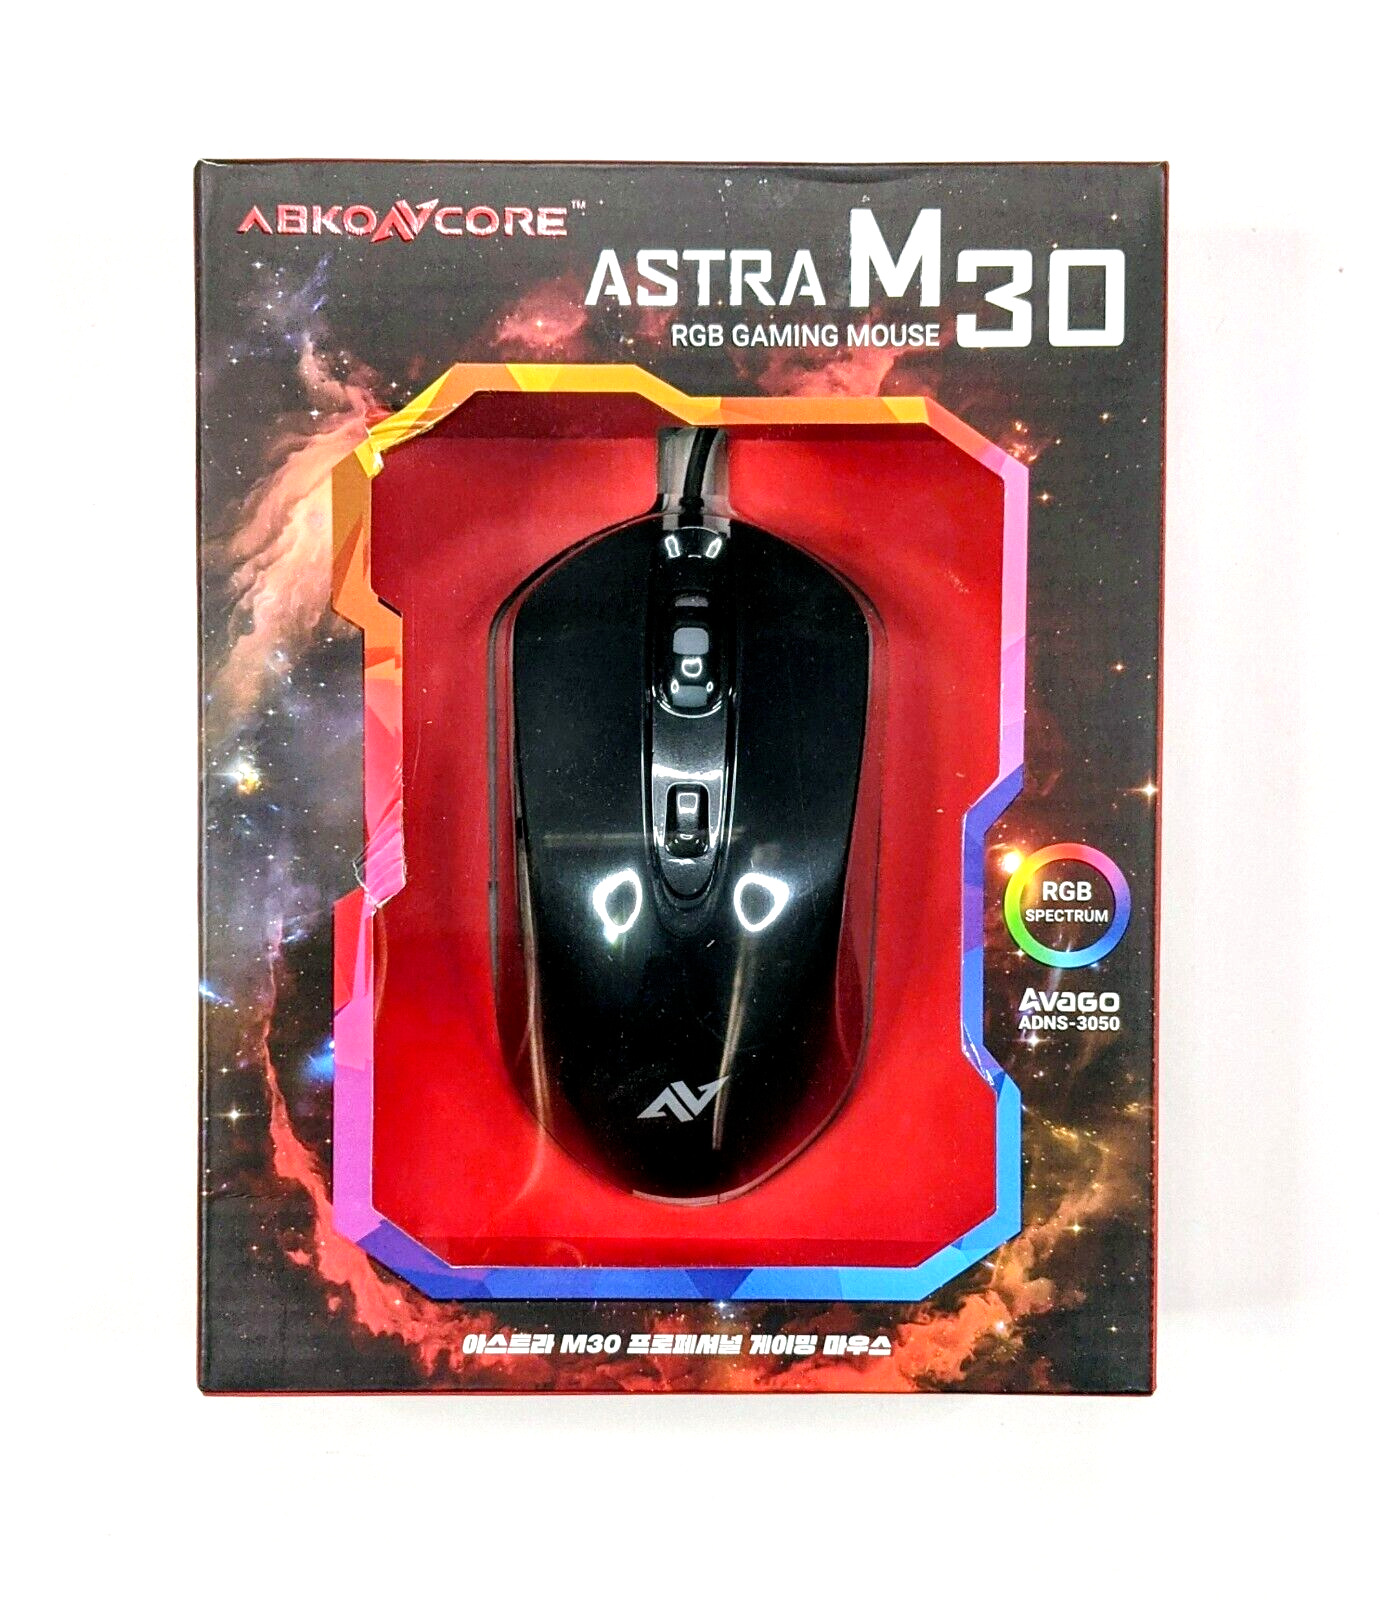 ABKONCORE Astra M30 Gaming Mouse Wired, USB Computer Mice for Game & Daily